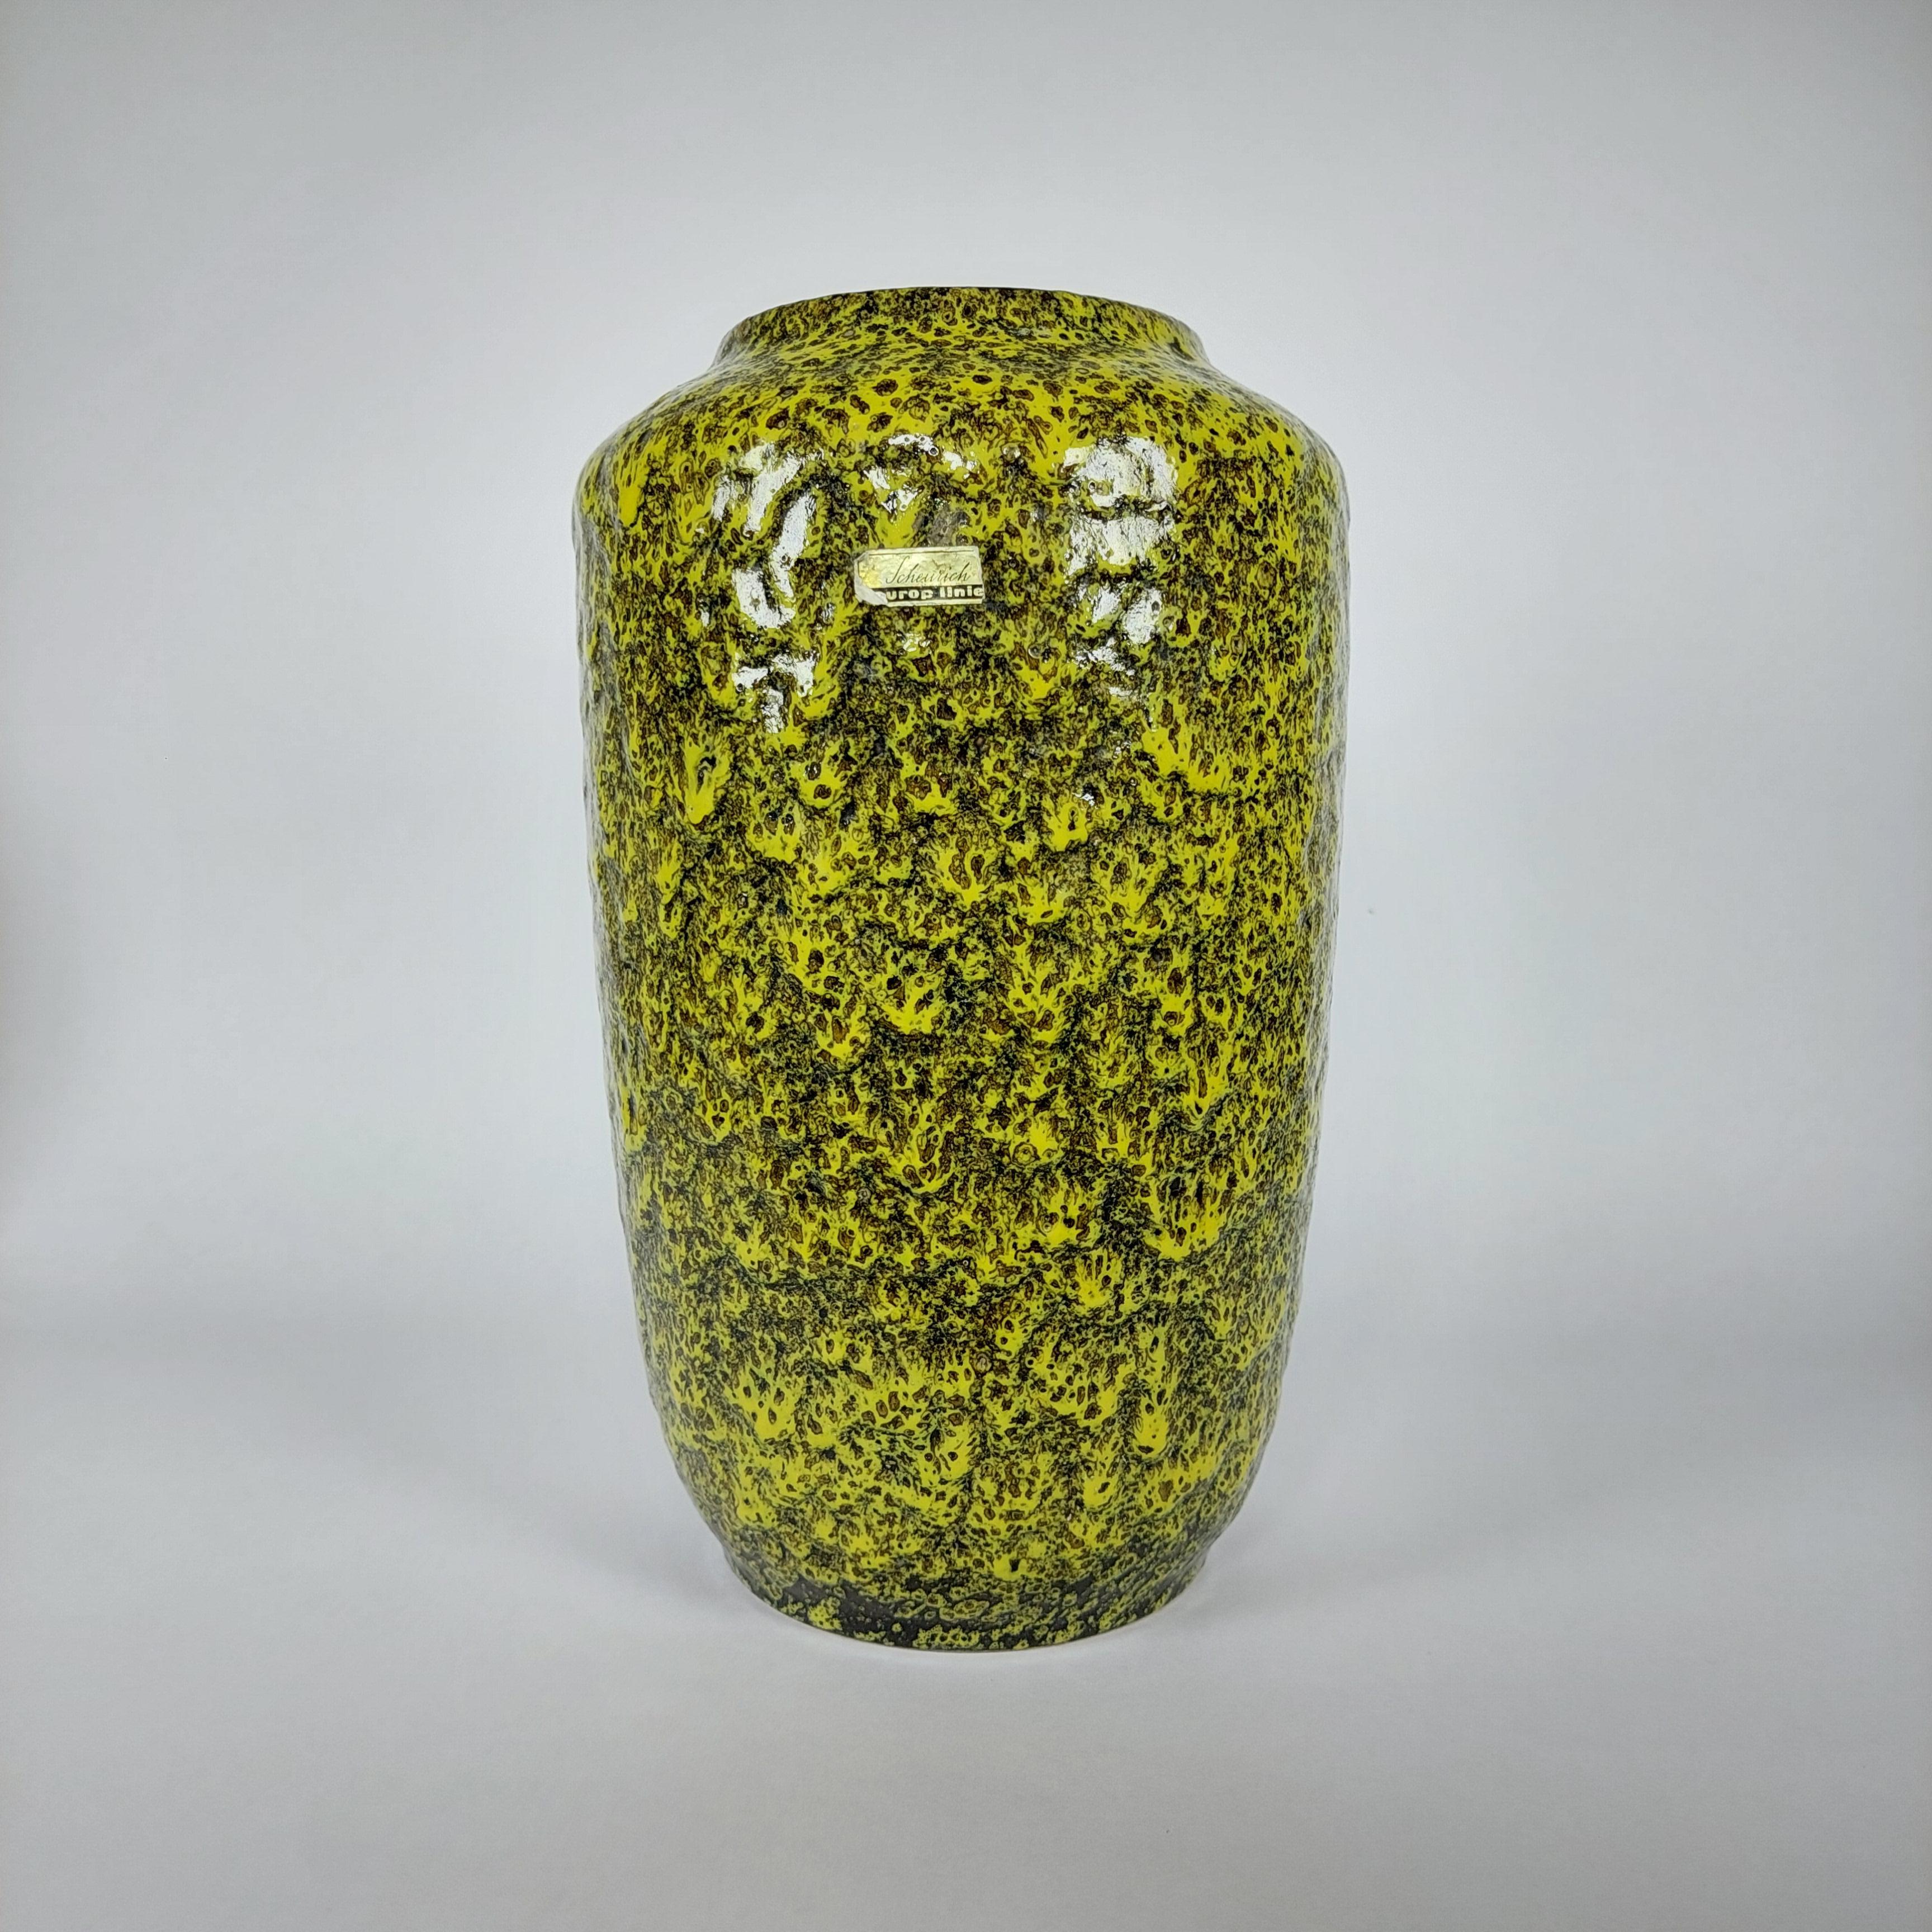 Beautiful mid-sized ceramic vase by Scheurich of West Germany produced in the 1970s, using their number 517-30 format, which can be found in different styles by different craftsmen and women for the same company. This particular piece has a gorgeous